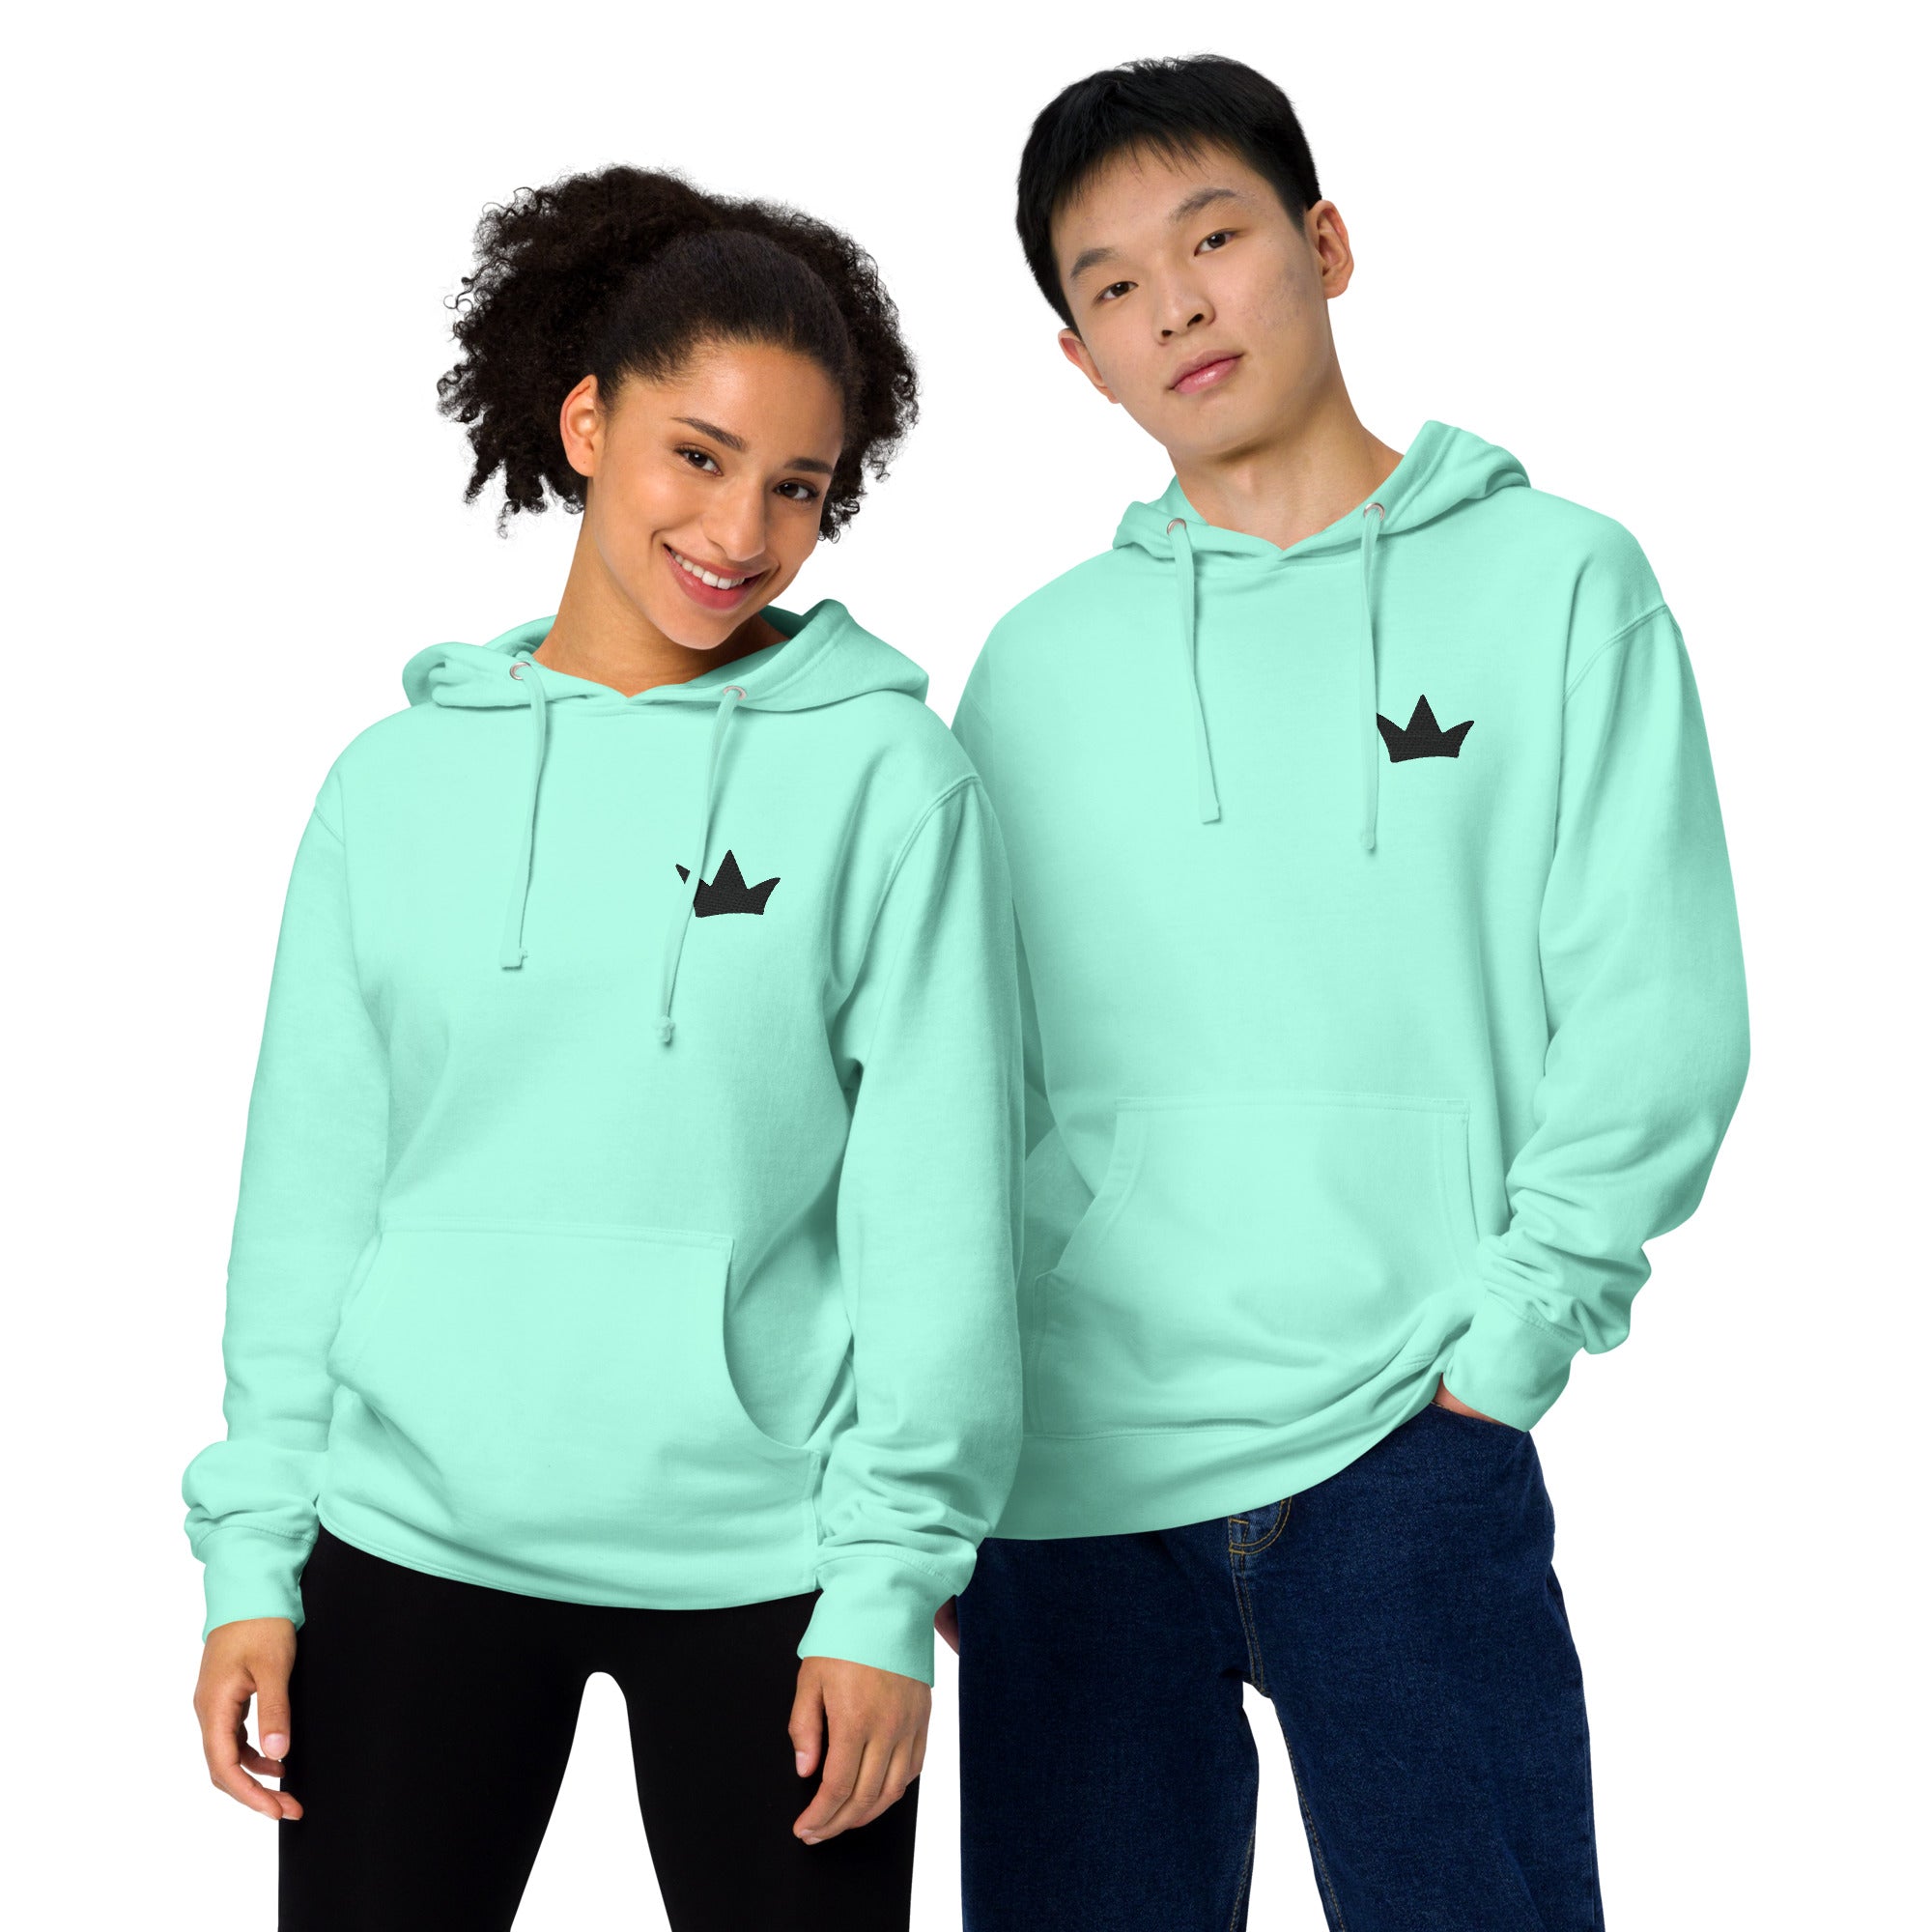 Crown unisex cotton hoodie for teens & adults